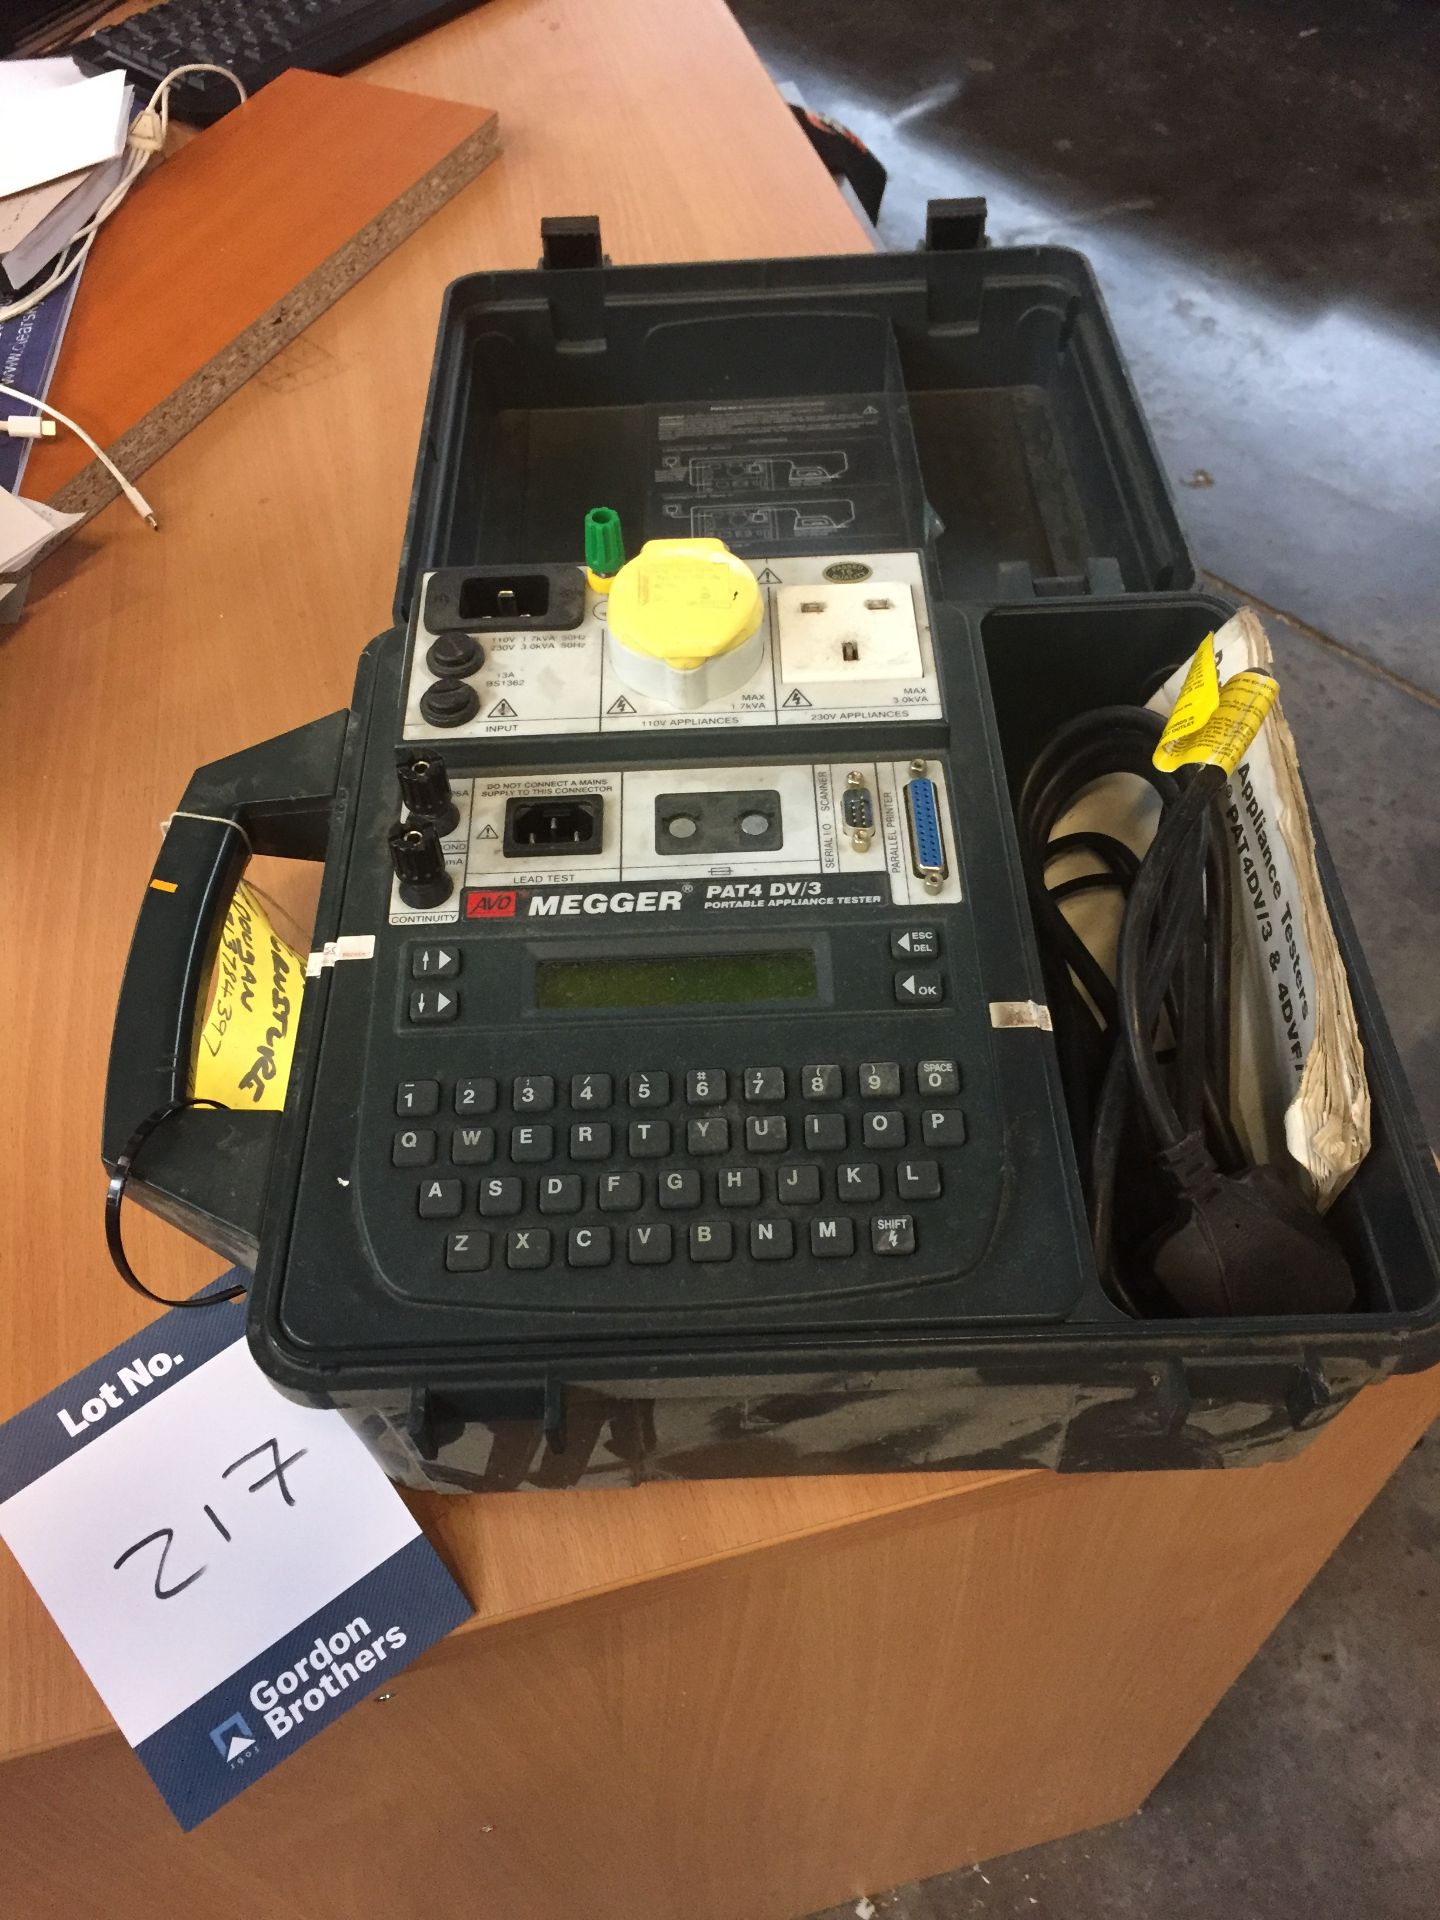 Avo Megger PAT4 DV/3 portable appliance tester and case ** This lot is located at The Dowlais